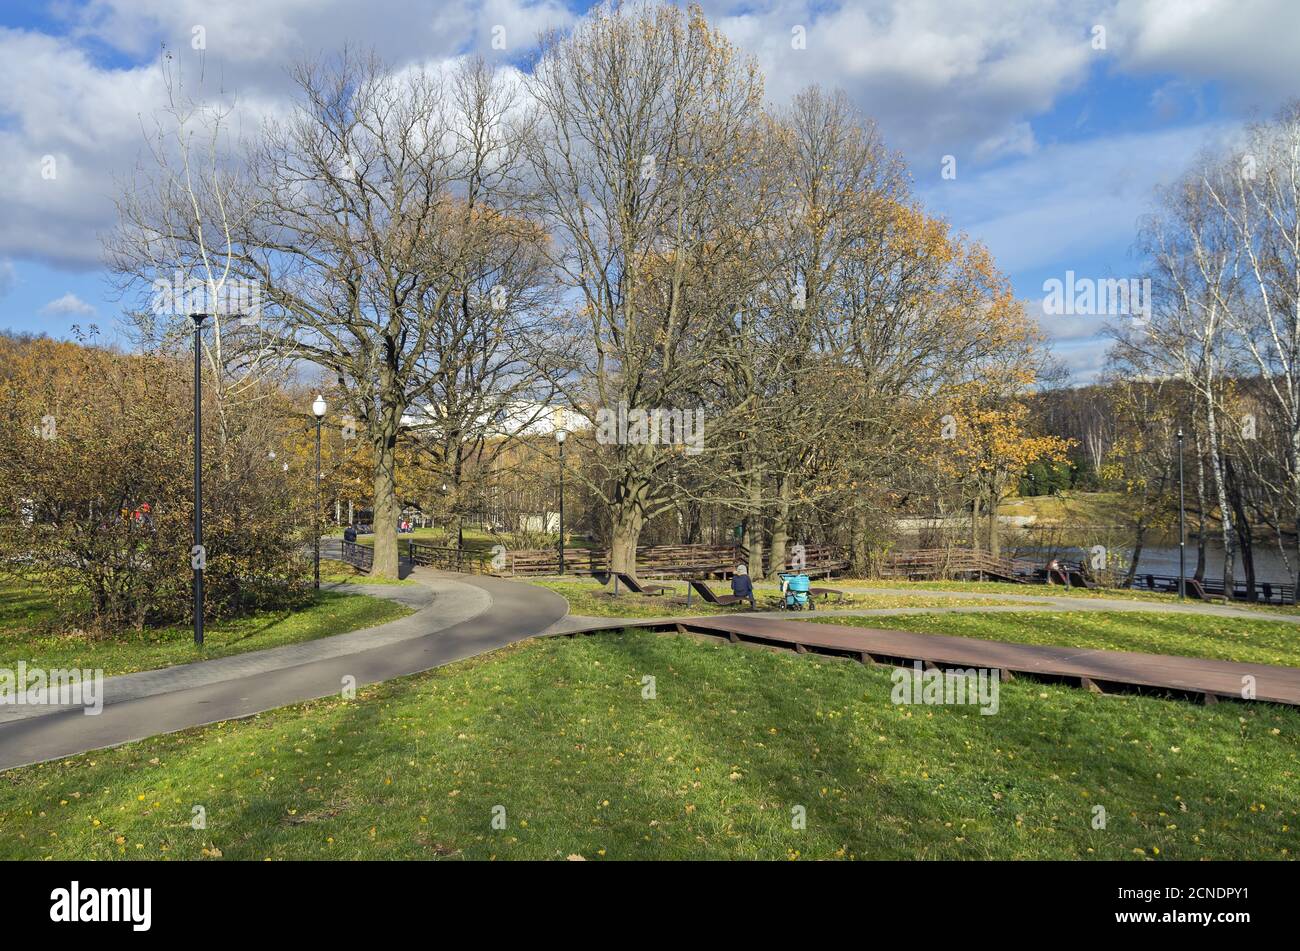 Footpaths in the park. October Stock Photo